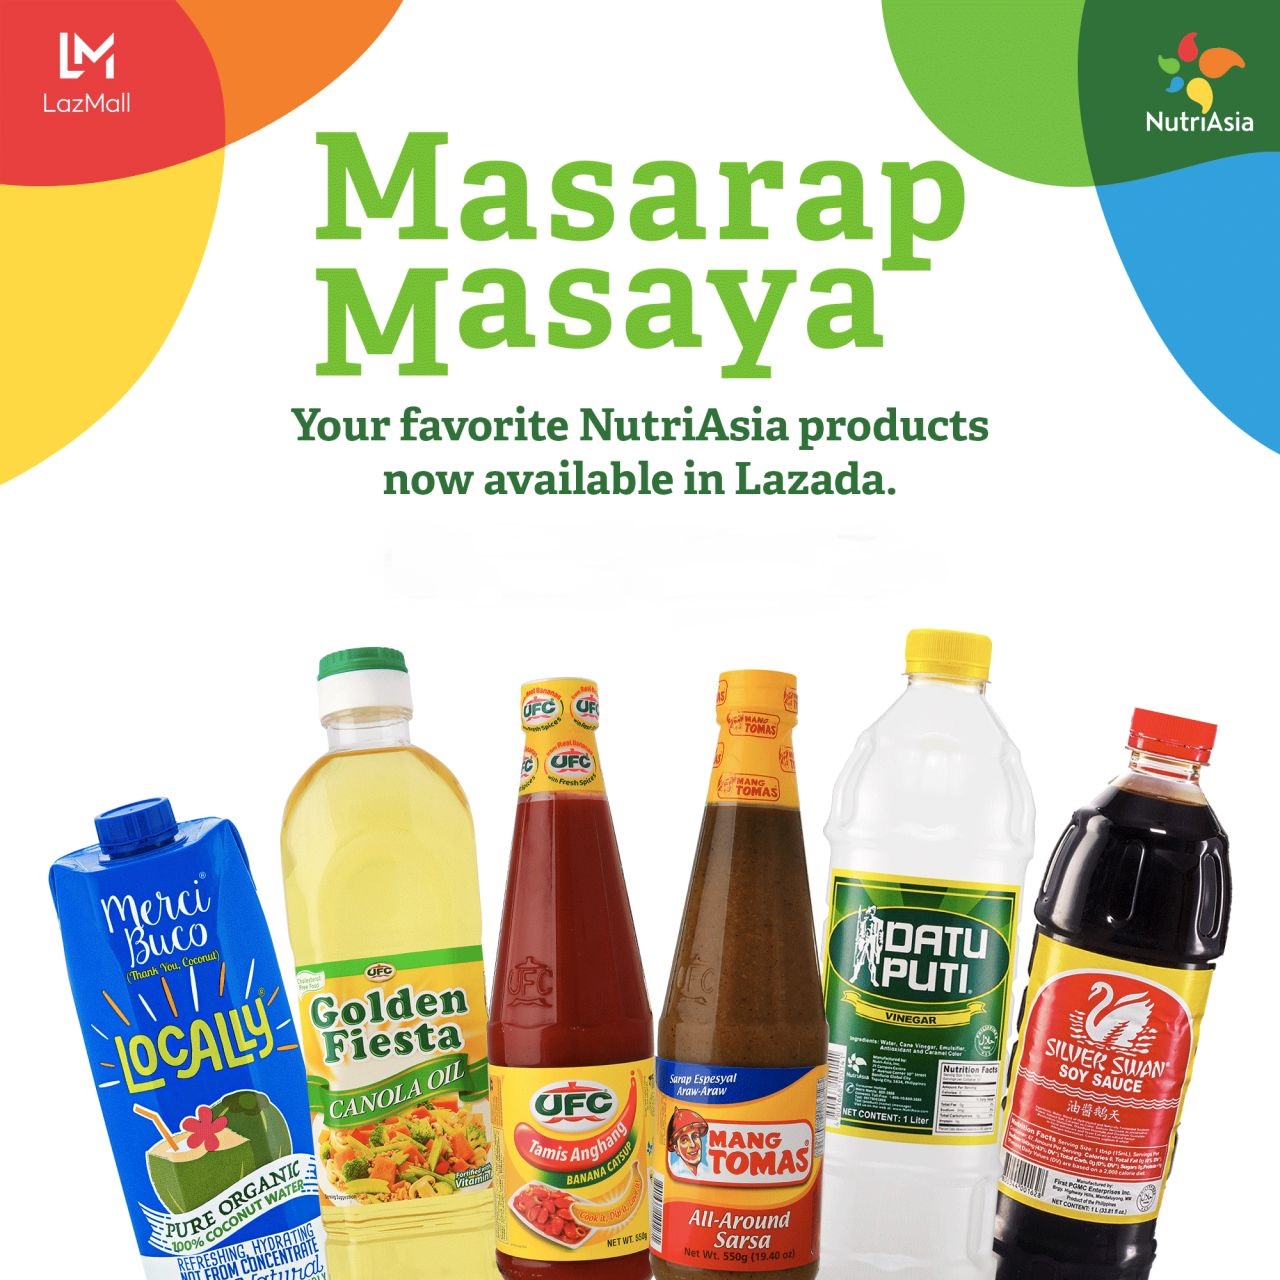 Shop for your favorite NutriAsia products safely from home via Shopee and Lazada!